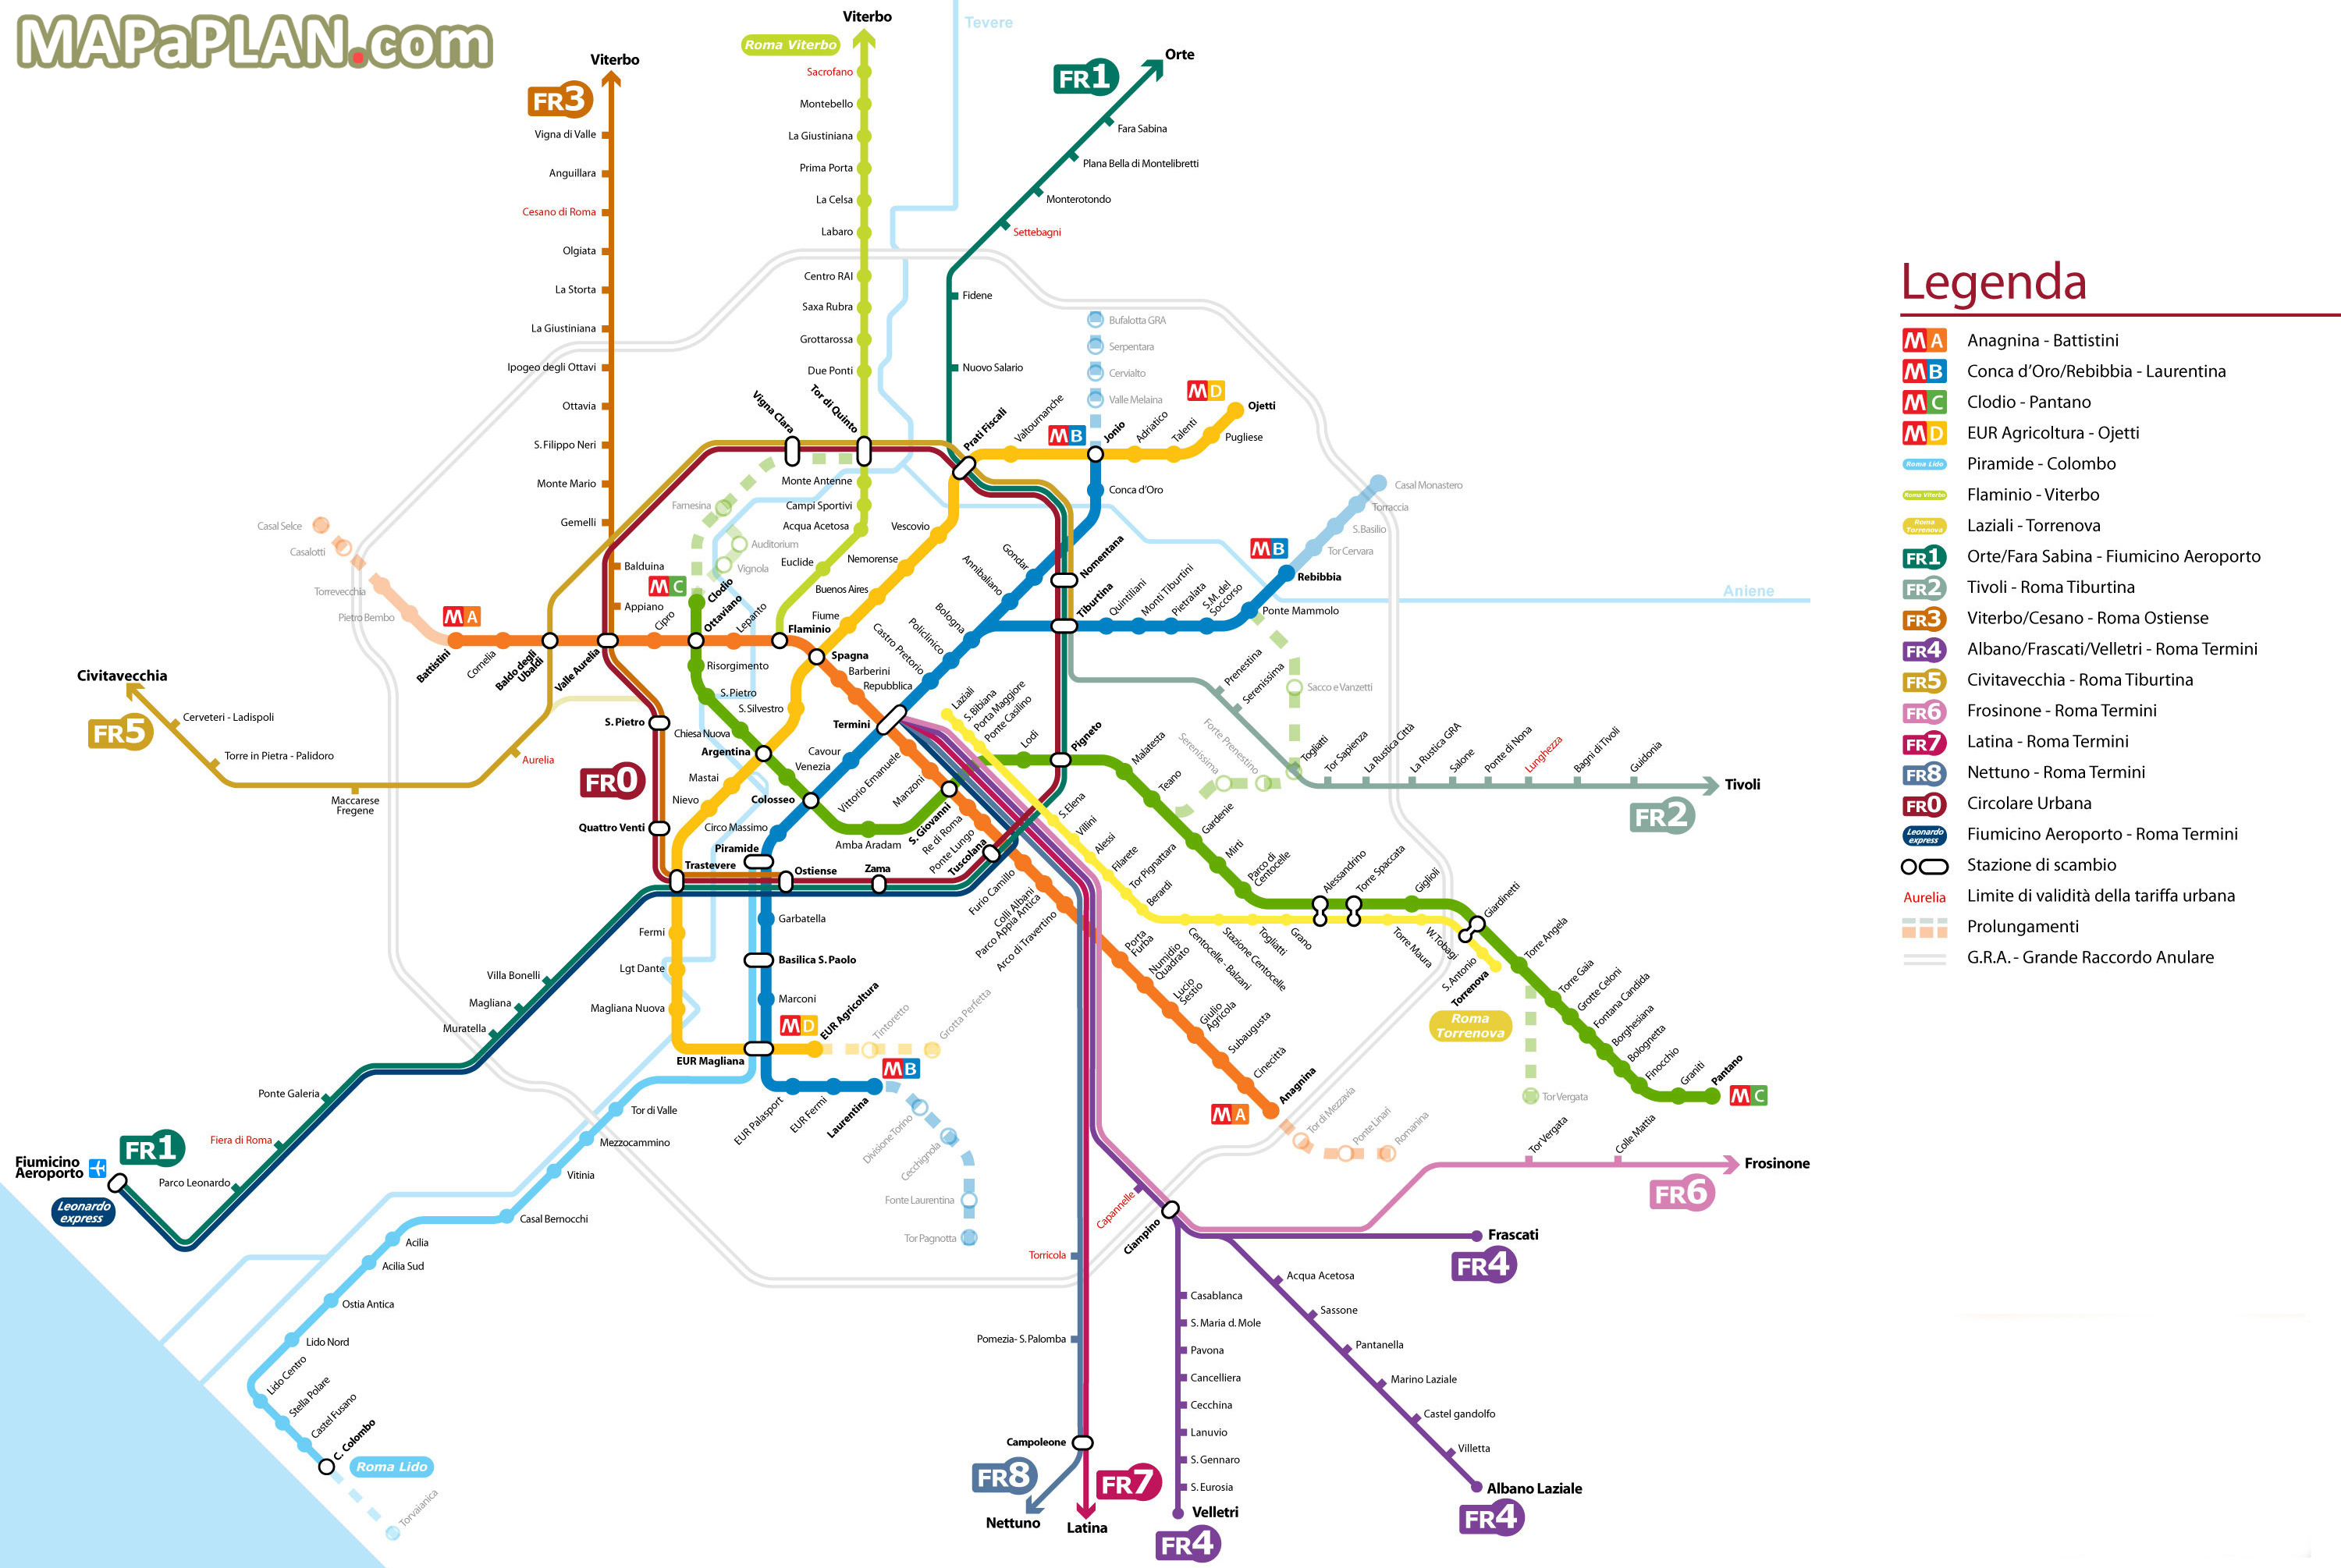 Metro Subway Tube stations visitor public transport map plan Rome top tourist attractions map